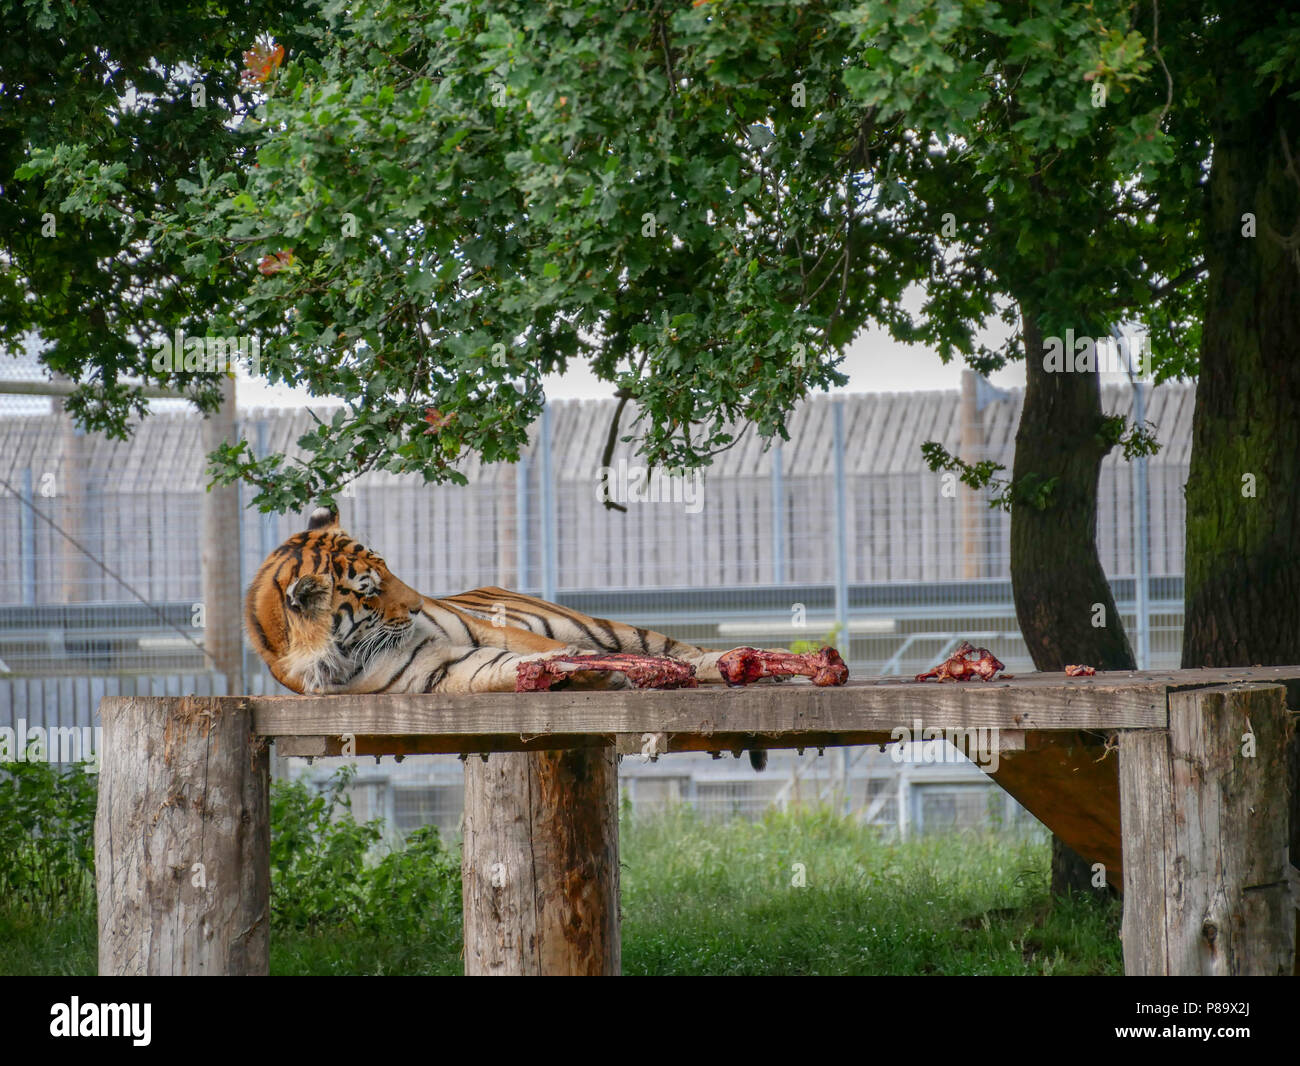 Yorkshire Wildlife Park in the UK on a summers day. Family attraction, zoo and wildlife park. Featuring animals that are in captivity but looked after. Stock Photo